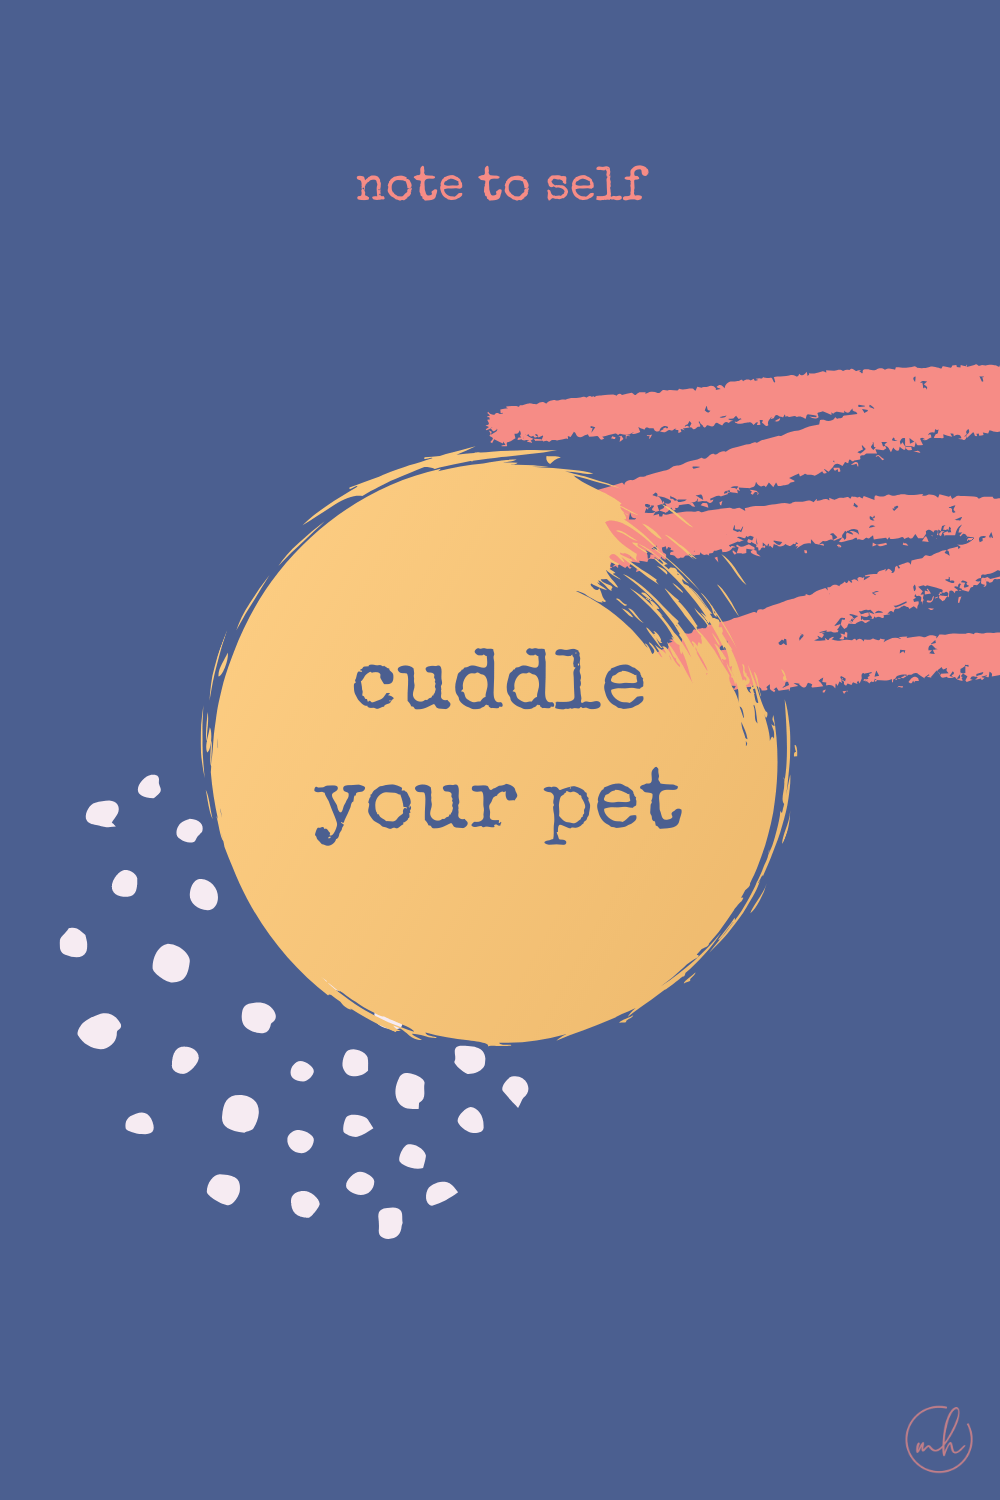 Cuddle your pet - Note to self quotes | myhoogah